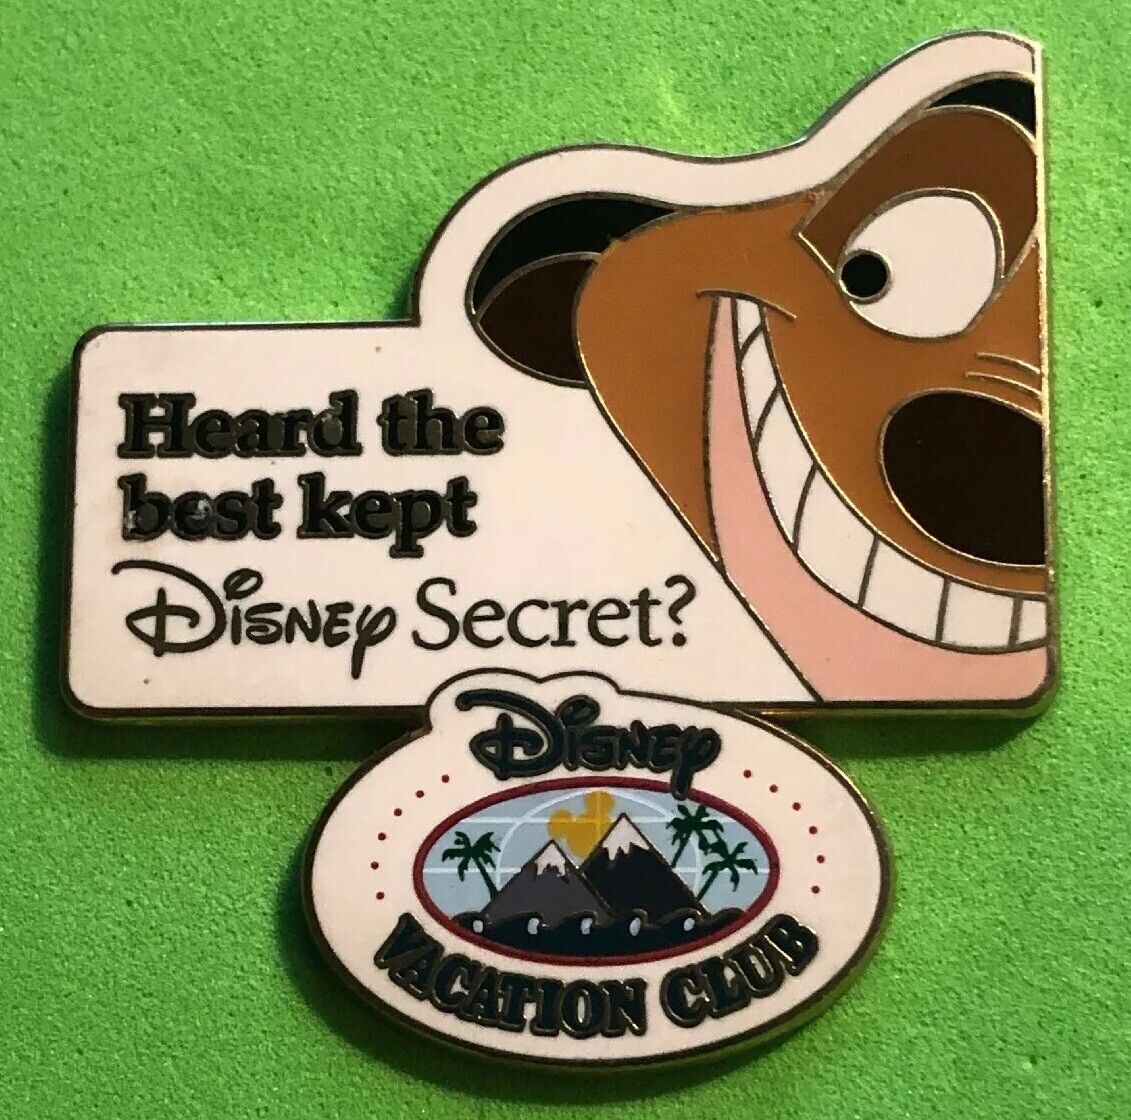 DISNEY VACATION CLUB 2007 DVC BEST KEPT SECRET TIMON FROM THE LION KING PIN